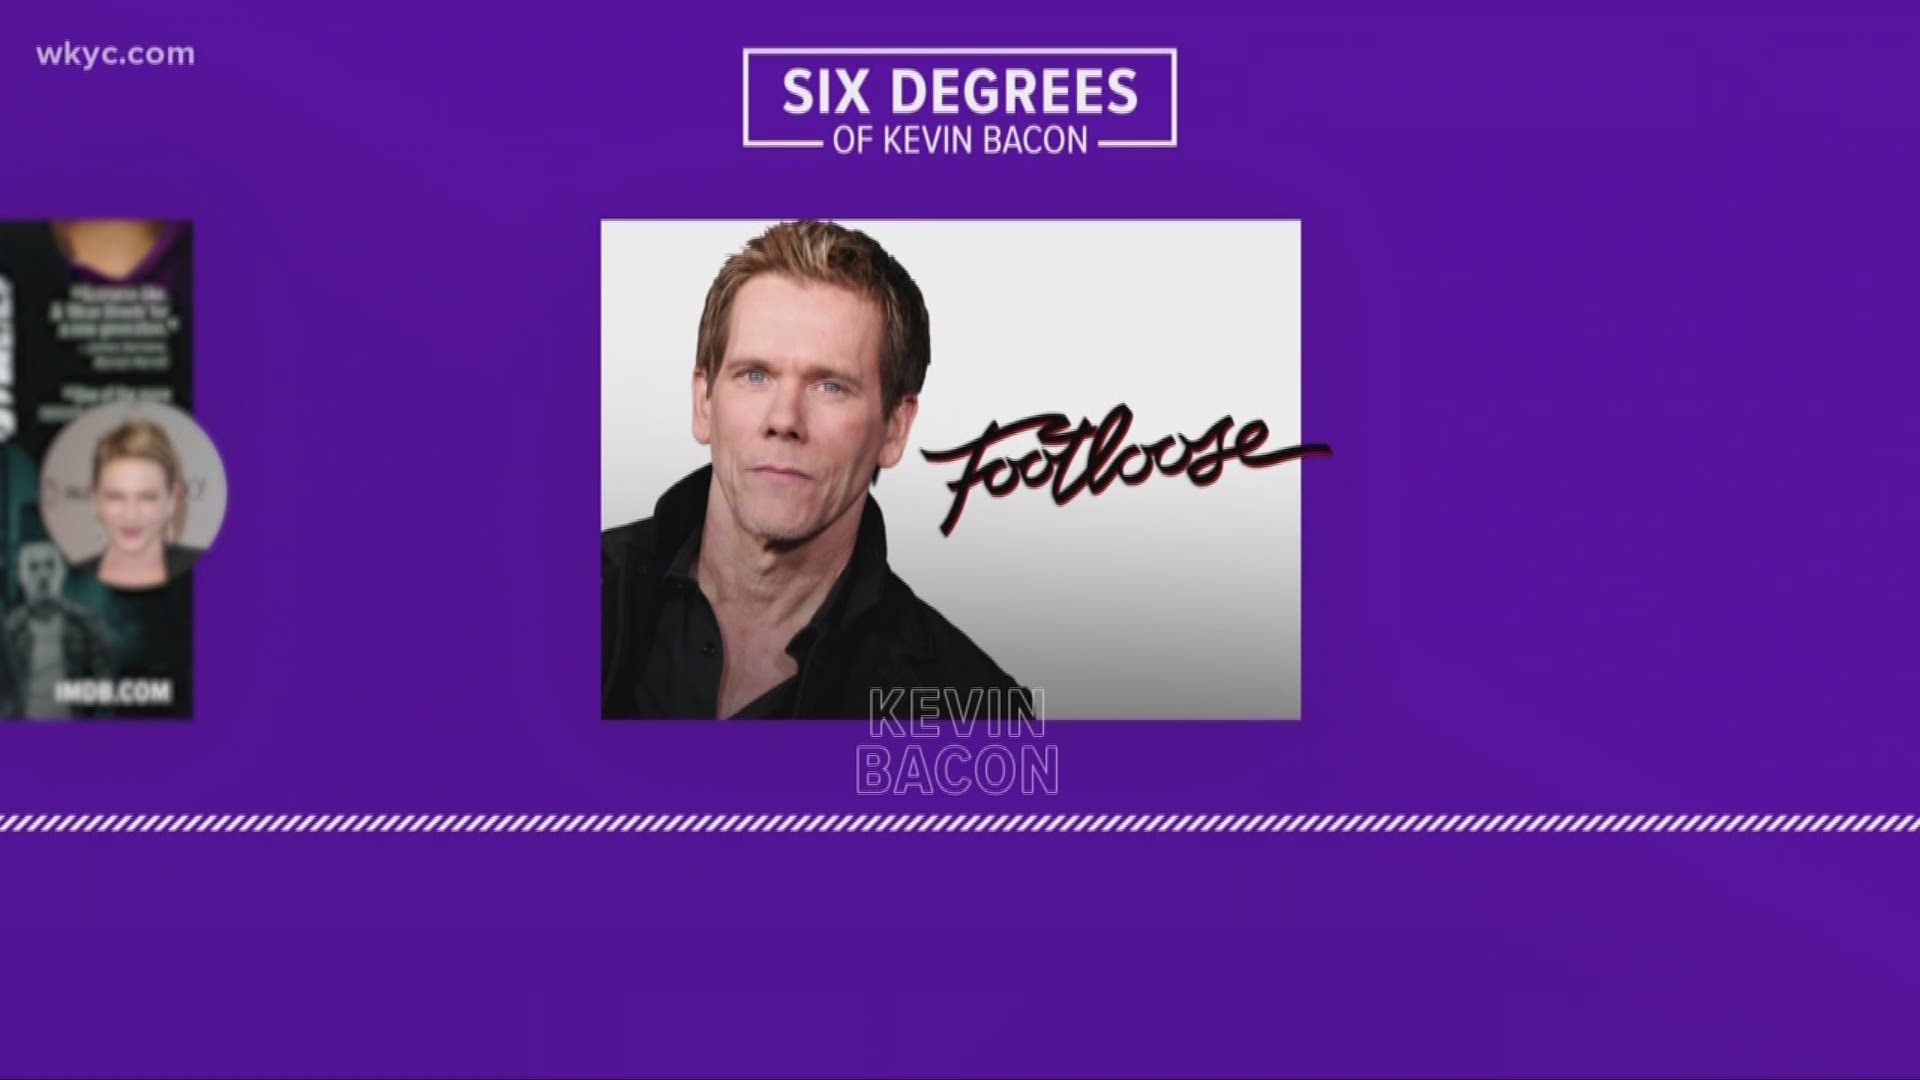 July 11, 2018: As the Bacon brothers prepare to perform in Cleveland, we thought it would be fun to find Will Ujek's six degrees with Kevin Bacon.